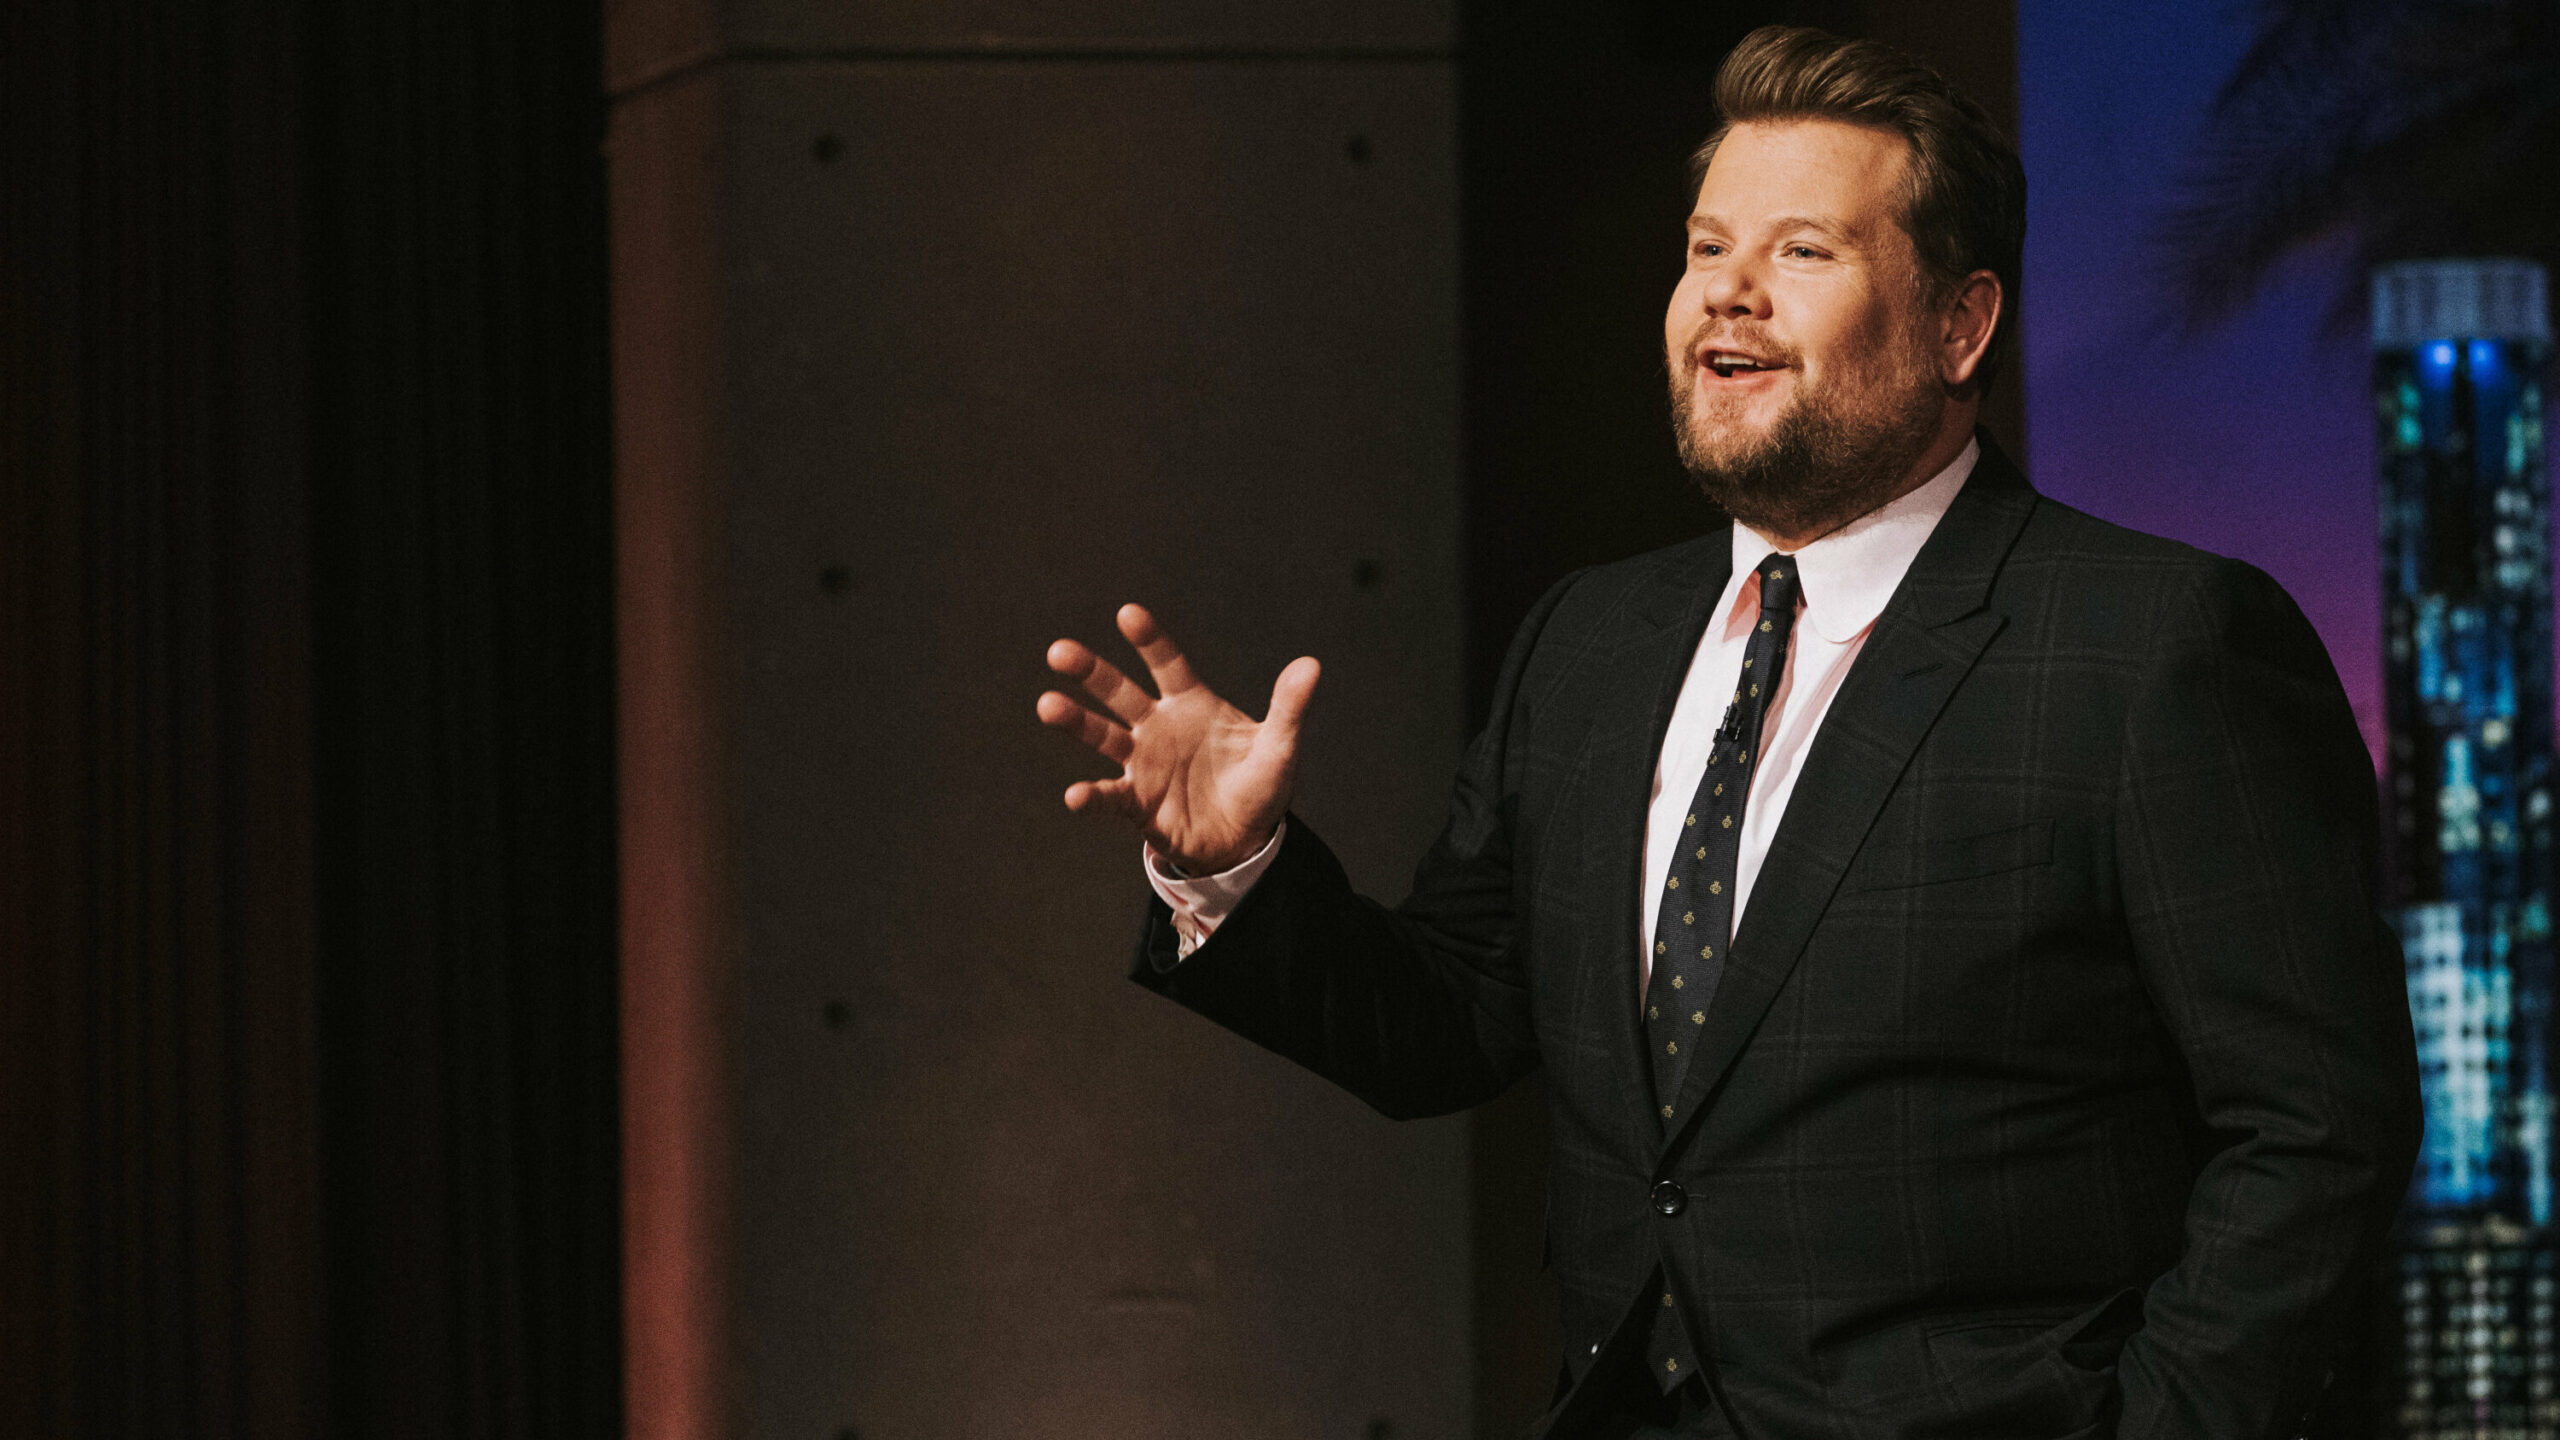 Comedian James Cordon is leaving his CBS Late-Night show next year